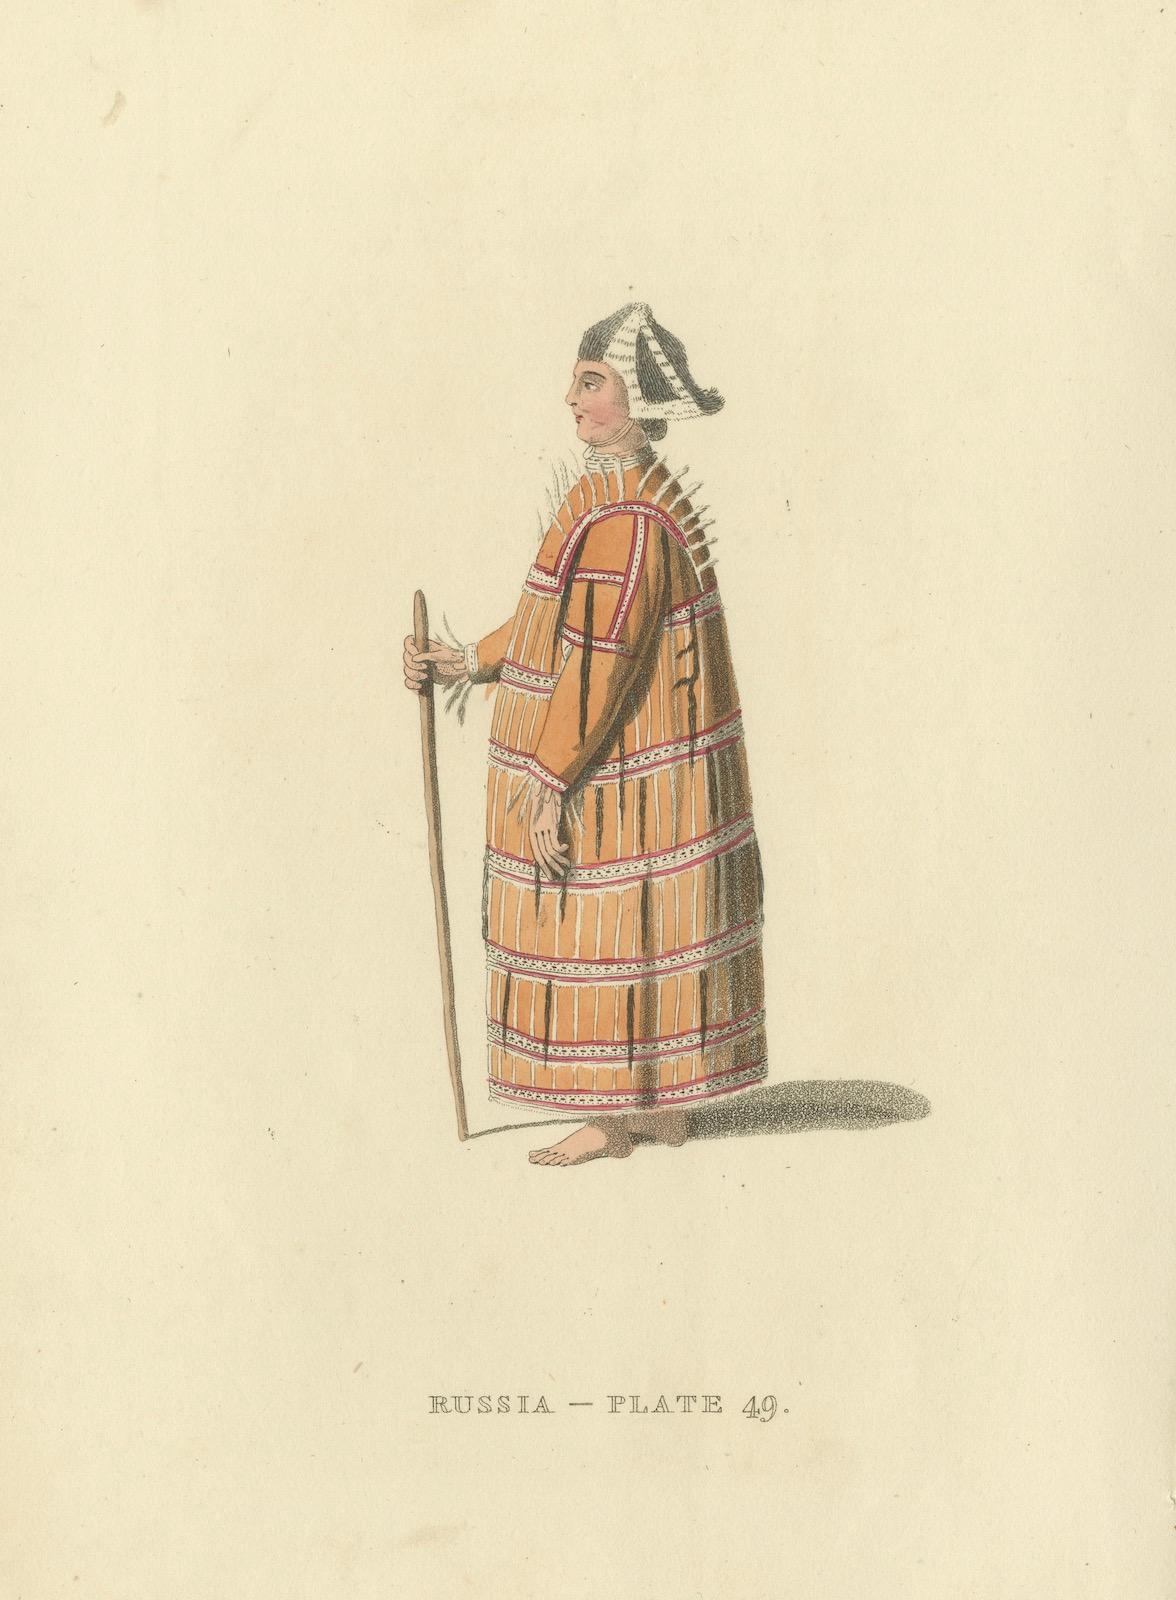 The hand-coloured images depict two individuals, presumably representative of the Aleut and Kuril ethnic groups, as part of a series titled 